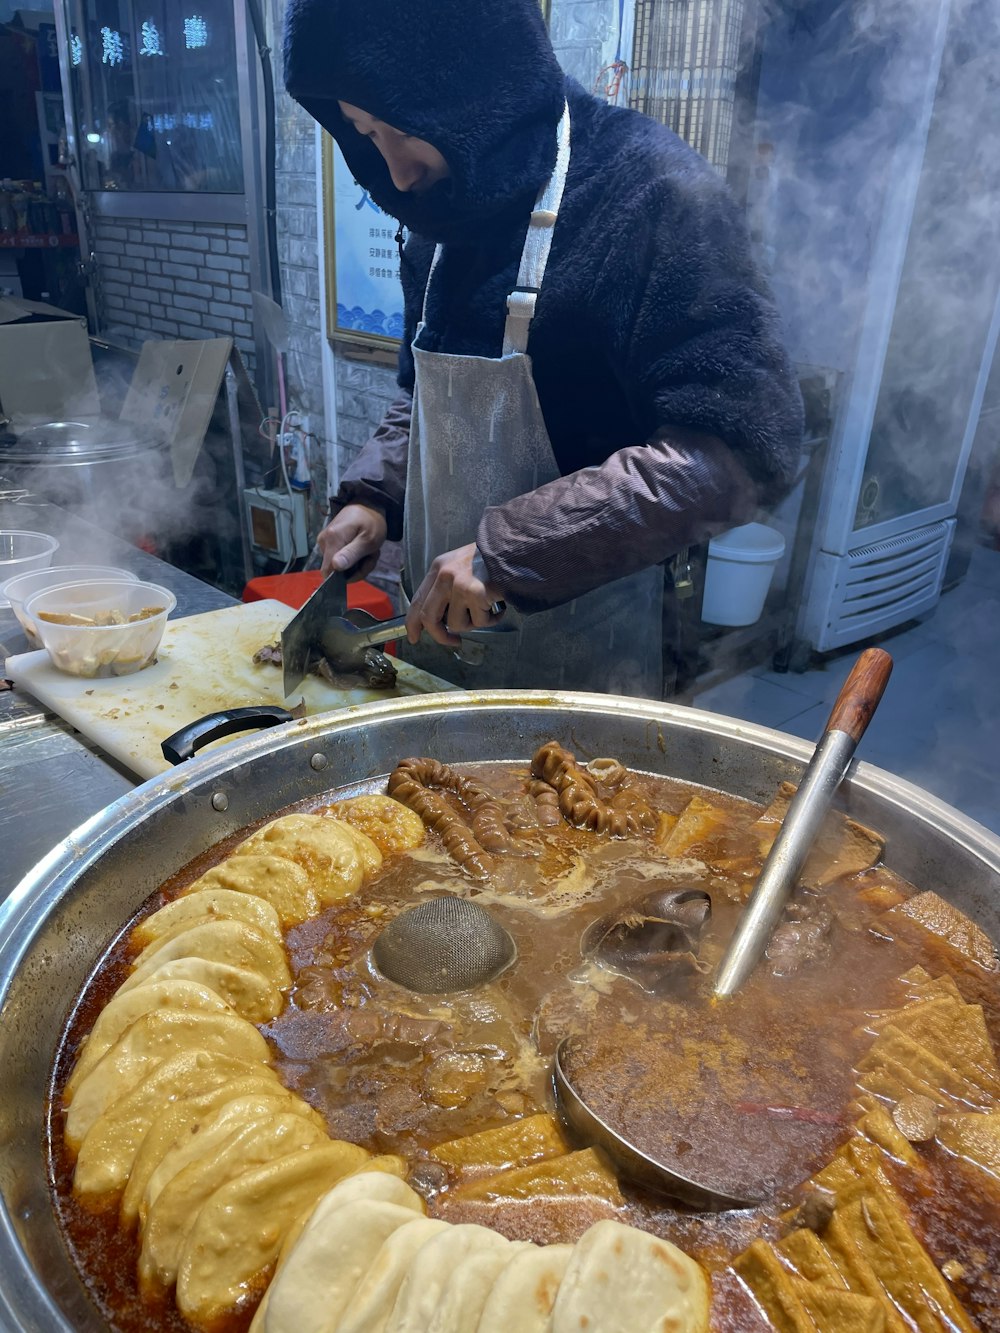 person in black and red jacket cooking food